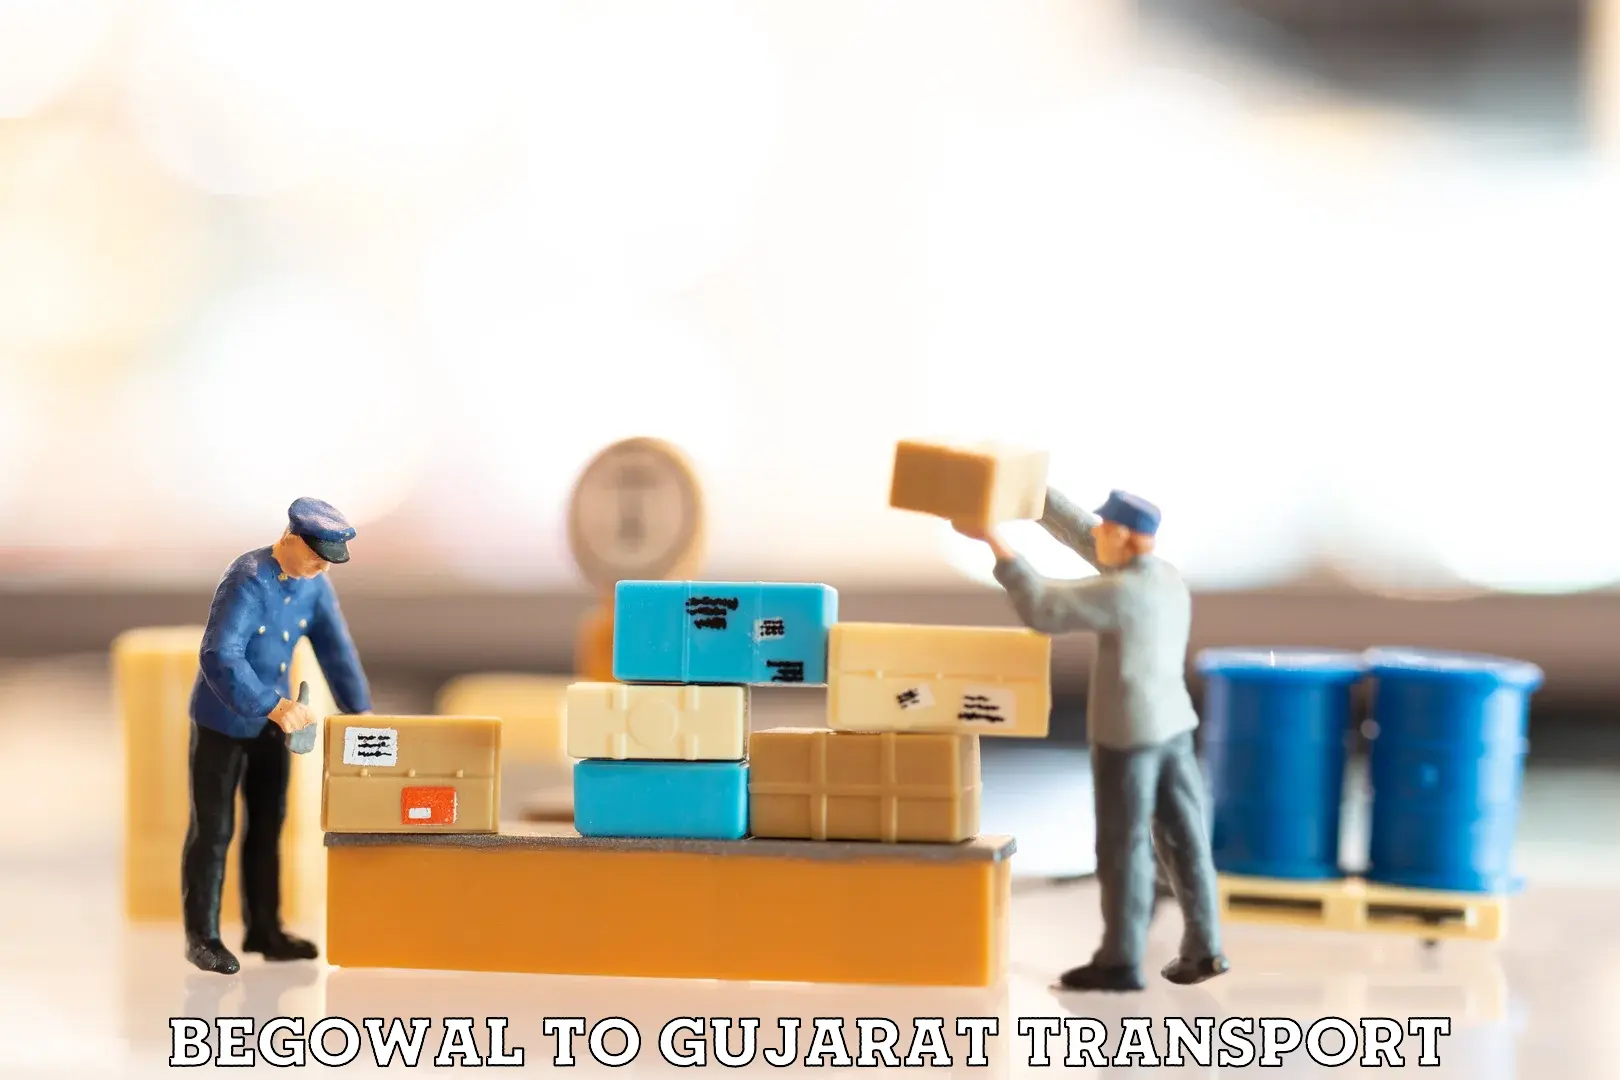 Commercial transport service Begowal to Gujarat